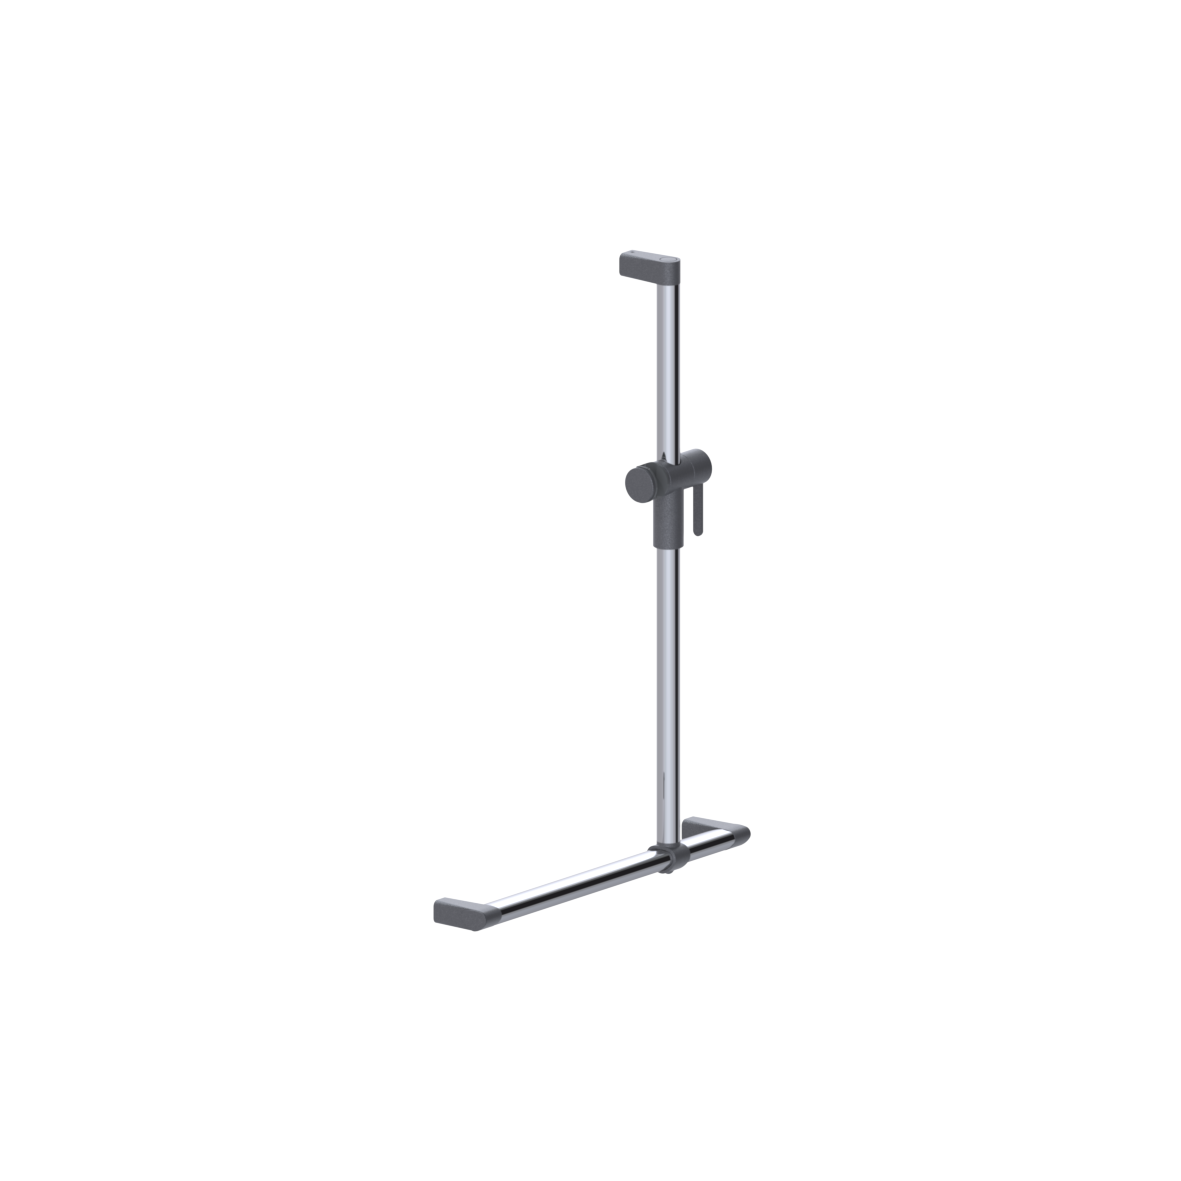 Cavere Care Chrome Shower handrail, with movable shower handrail, 500 x 750 mm, single-point mounting, Chrome metallic anthracite